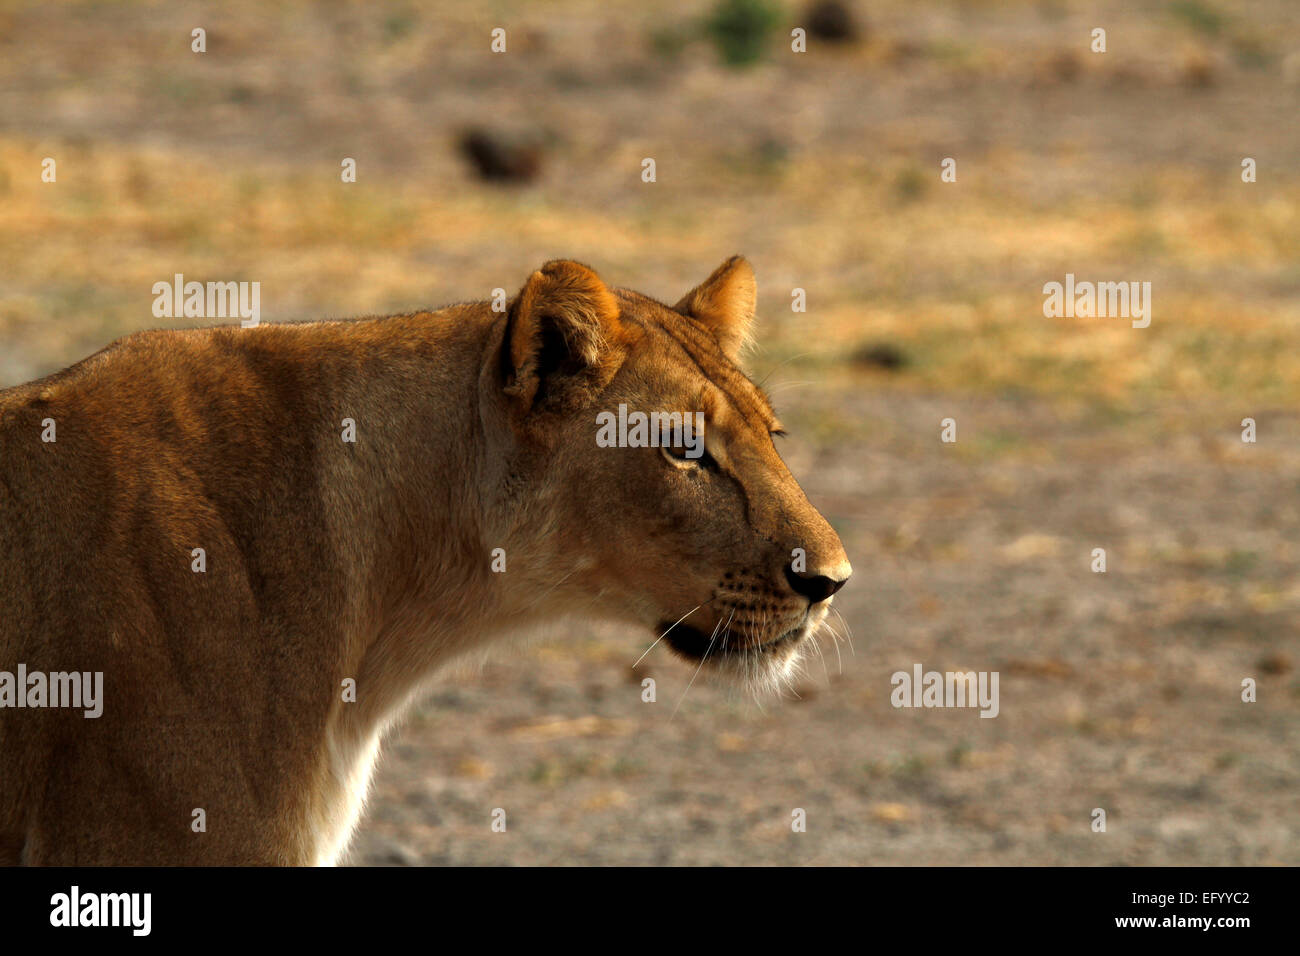 close up head study of an African lioness watching her prey. Majestic regal powerful animals, golden color blends in Stock Photo